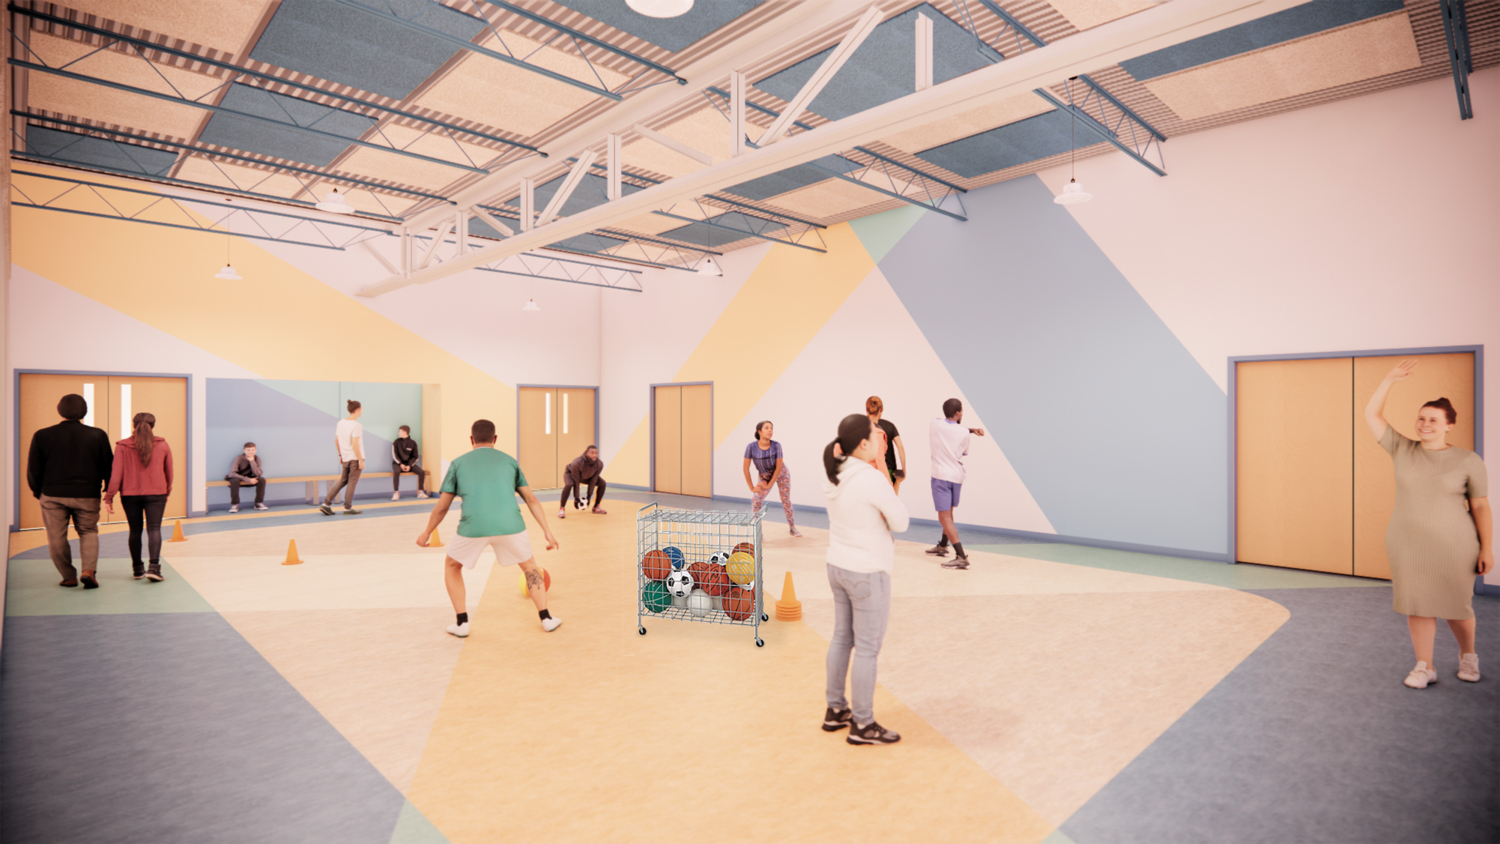 a rendering of people engaged in physical activity in a gymnasium